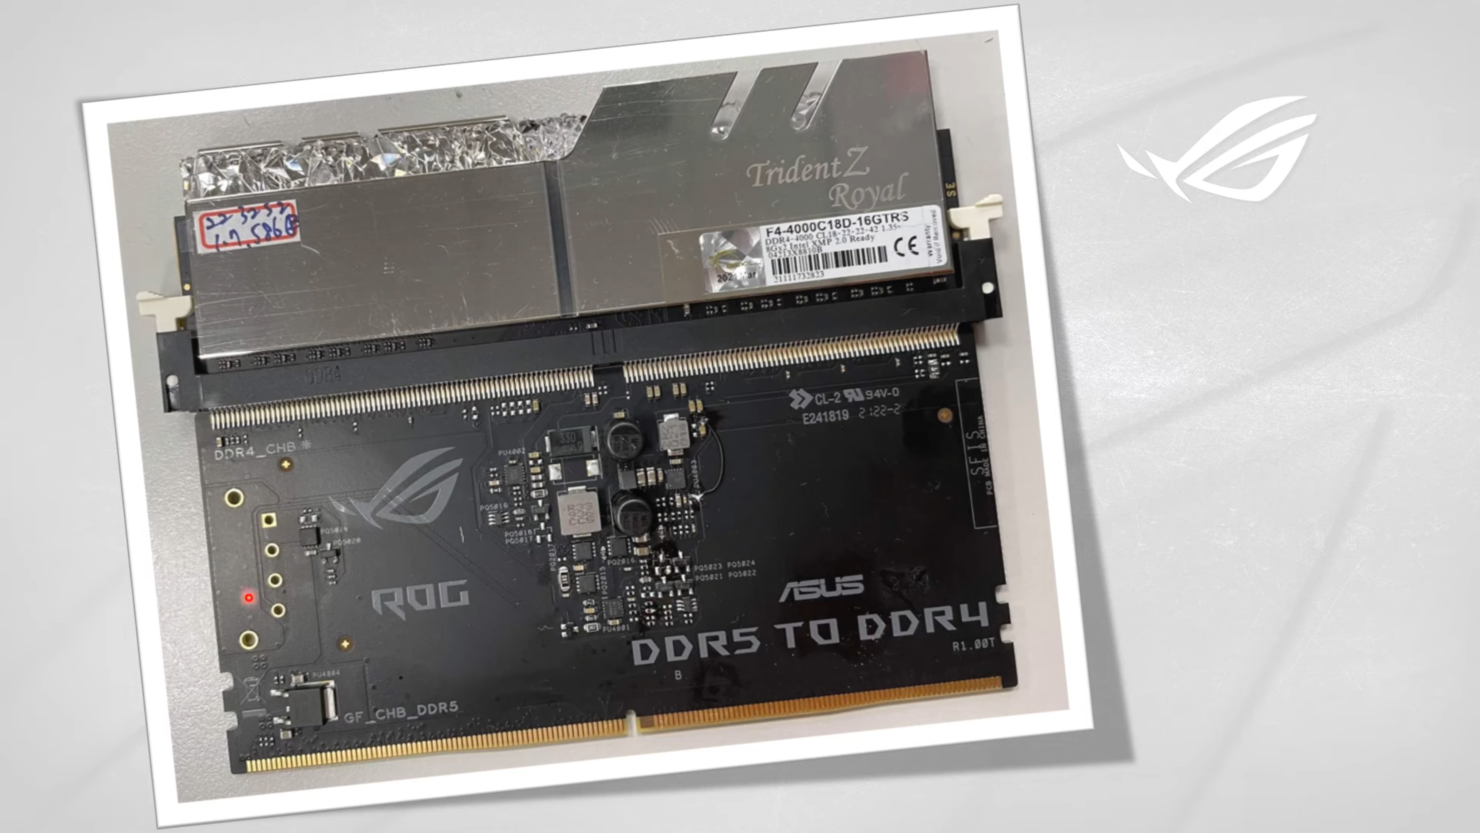 ASUS-ROG-DDR5-To-DDR4-Adapater-Board-_-Z690-Motherboards-_1-1480x833.png